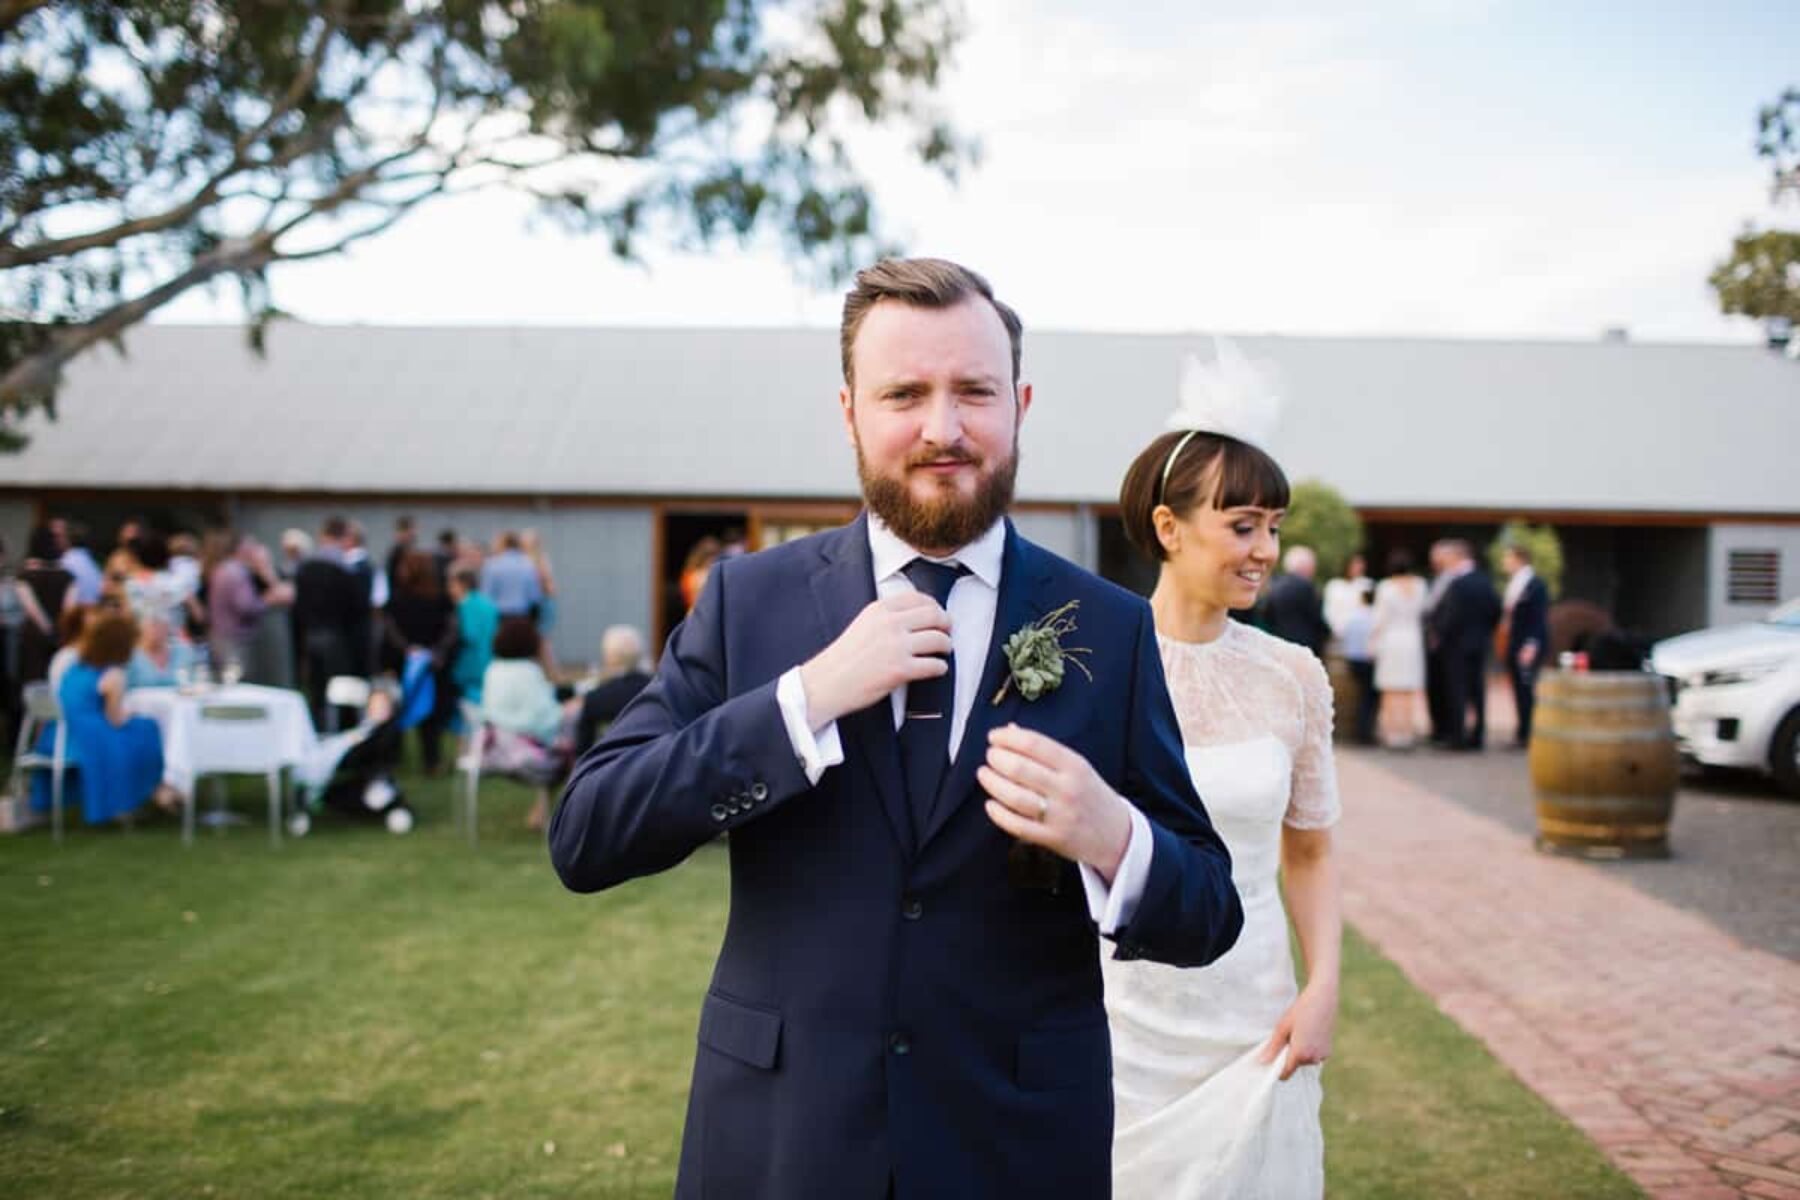 Colourful McLaren Vale wedding | Photography by Kate Pardey